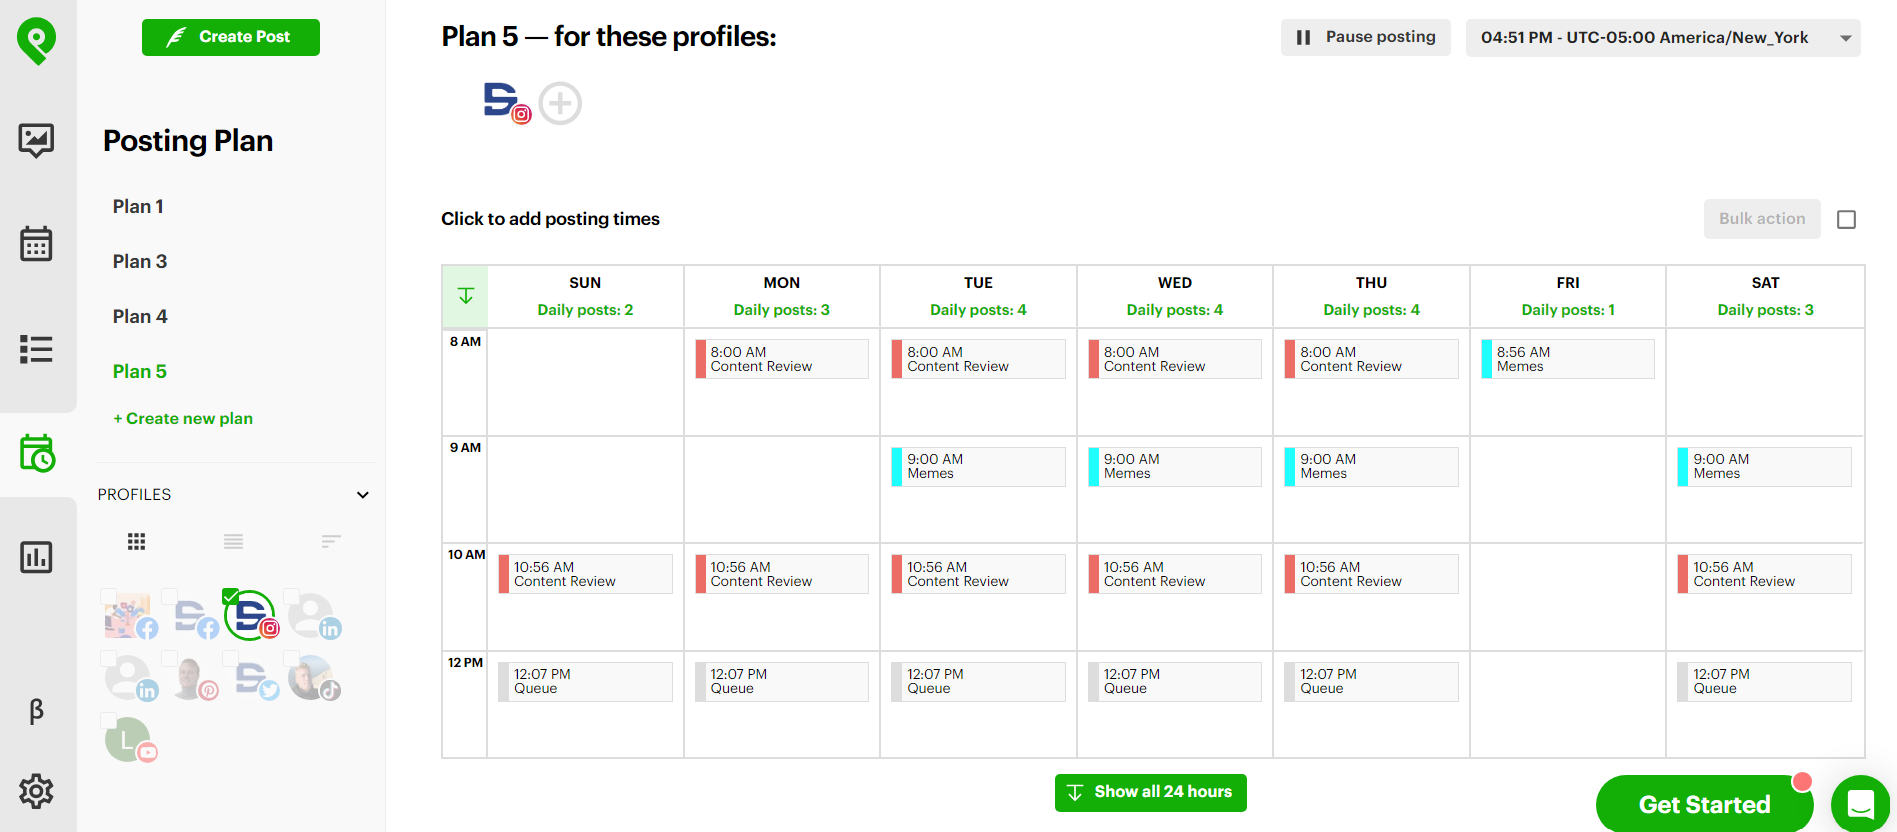 Create and optimize your posting schedule